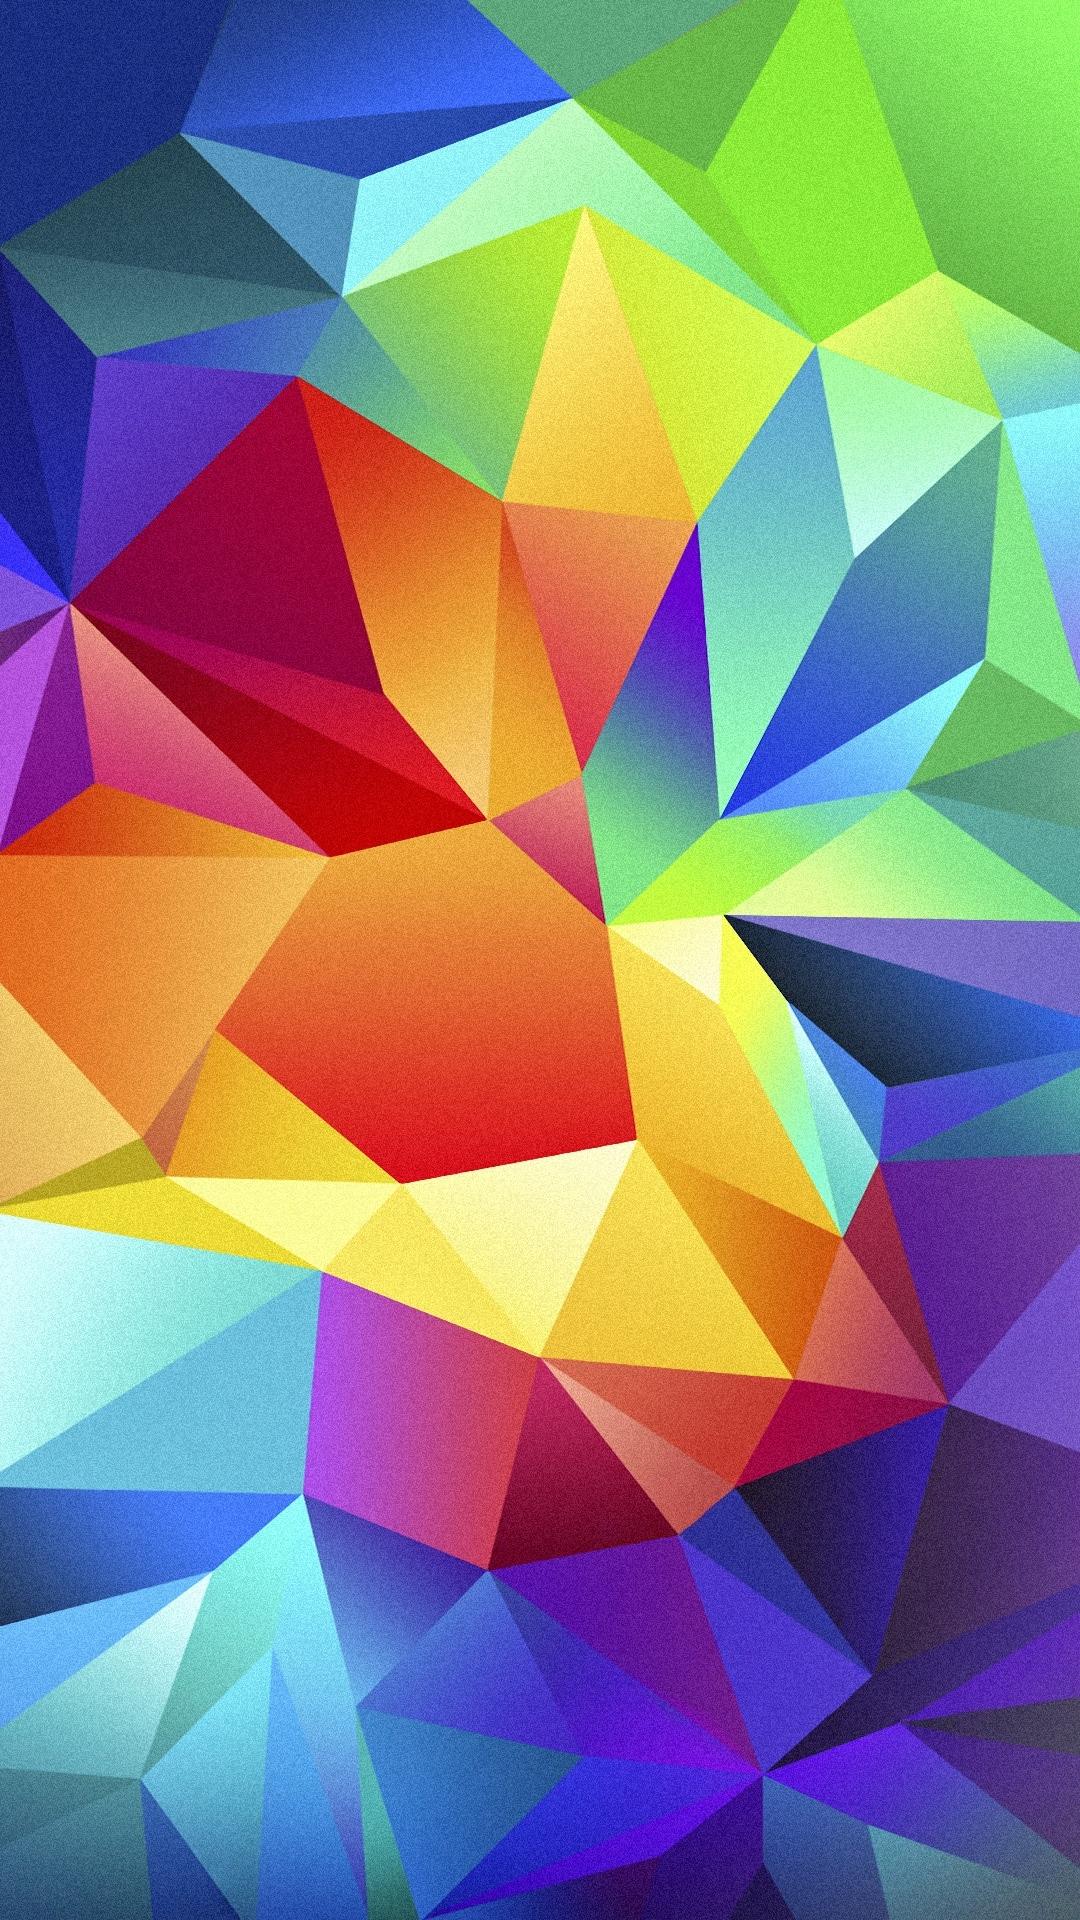 Best Galaxy S5 Wallpapers on WallpaperDog